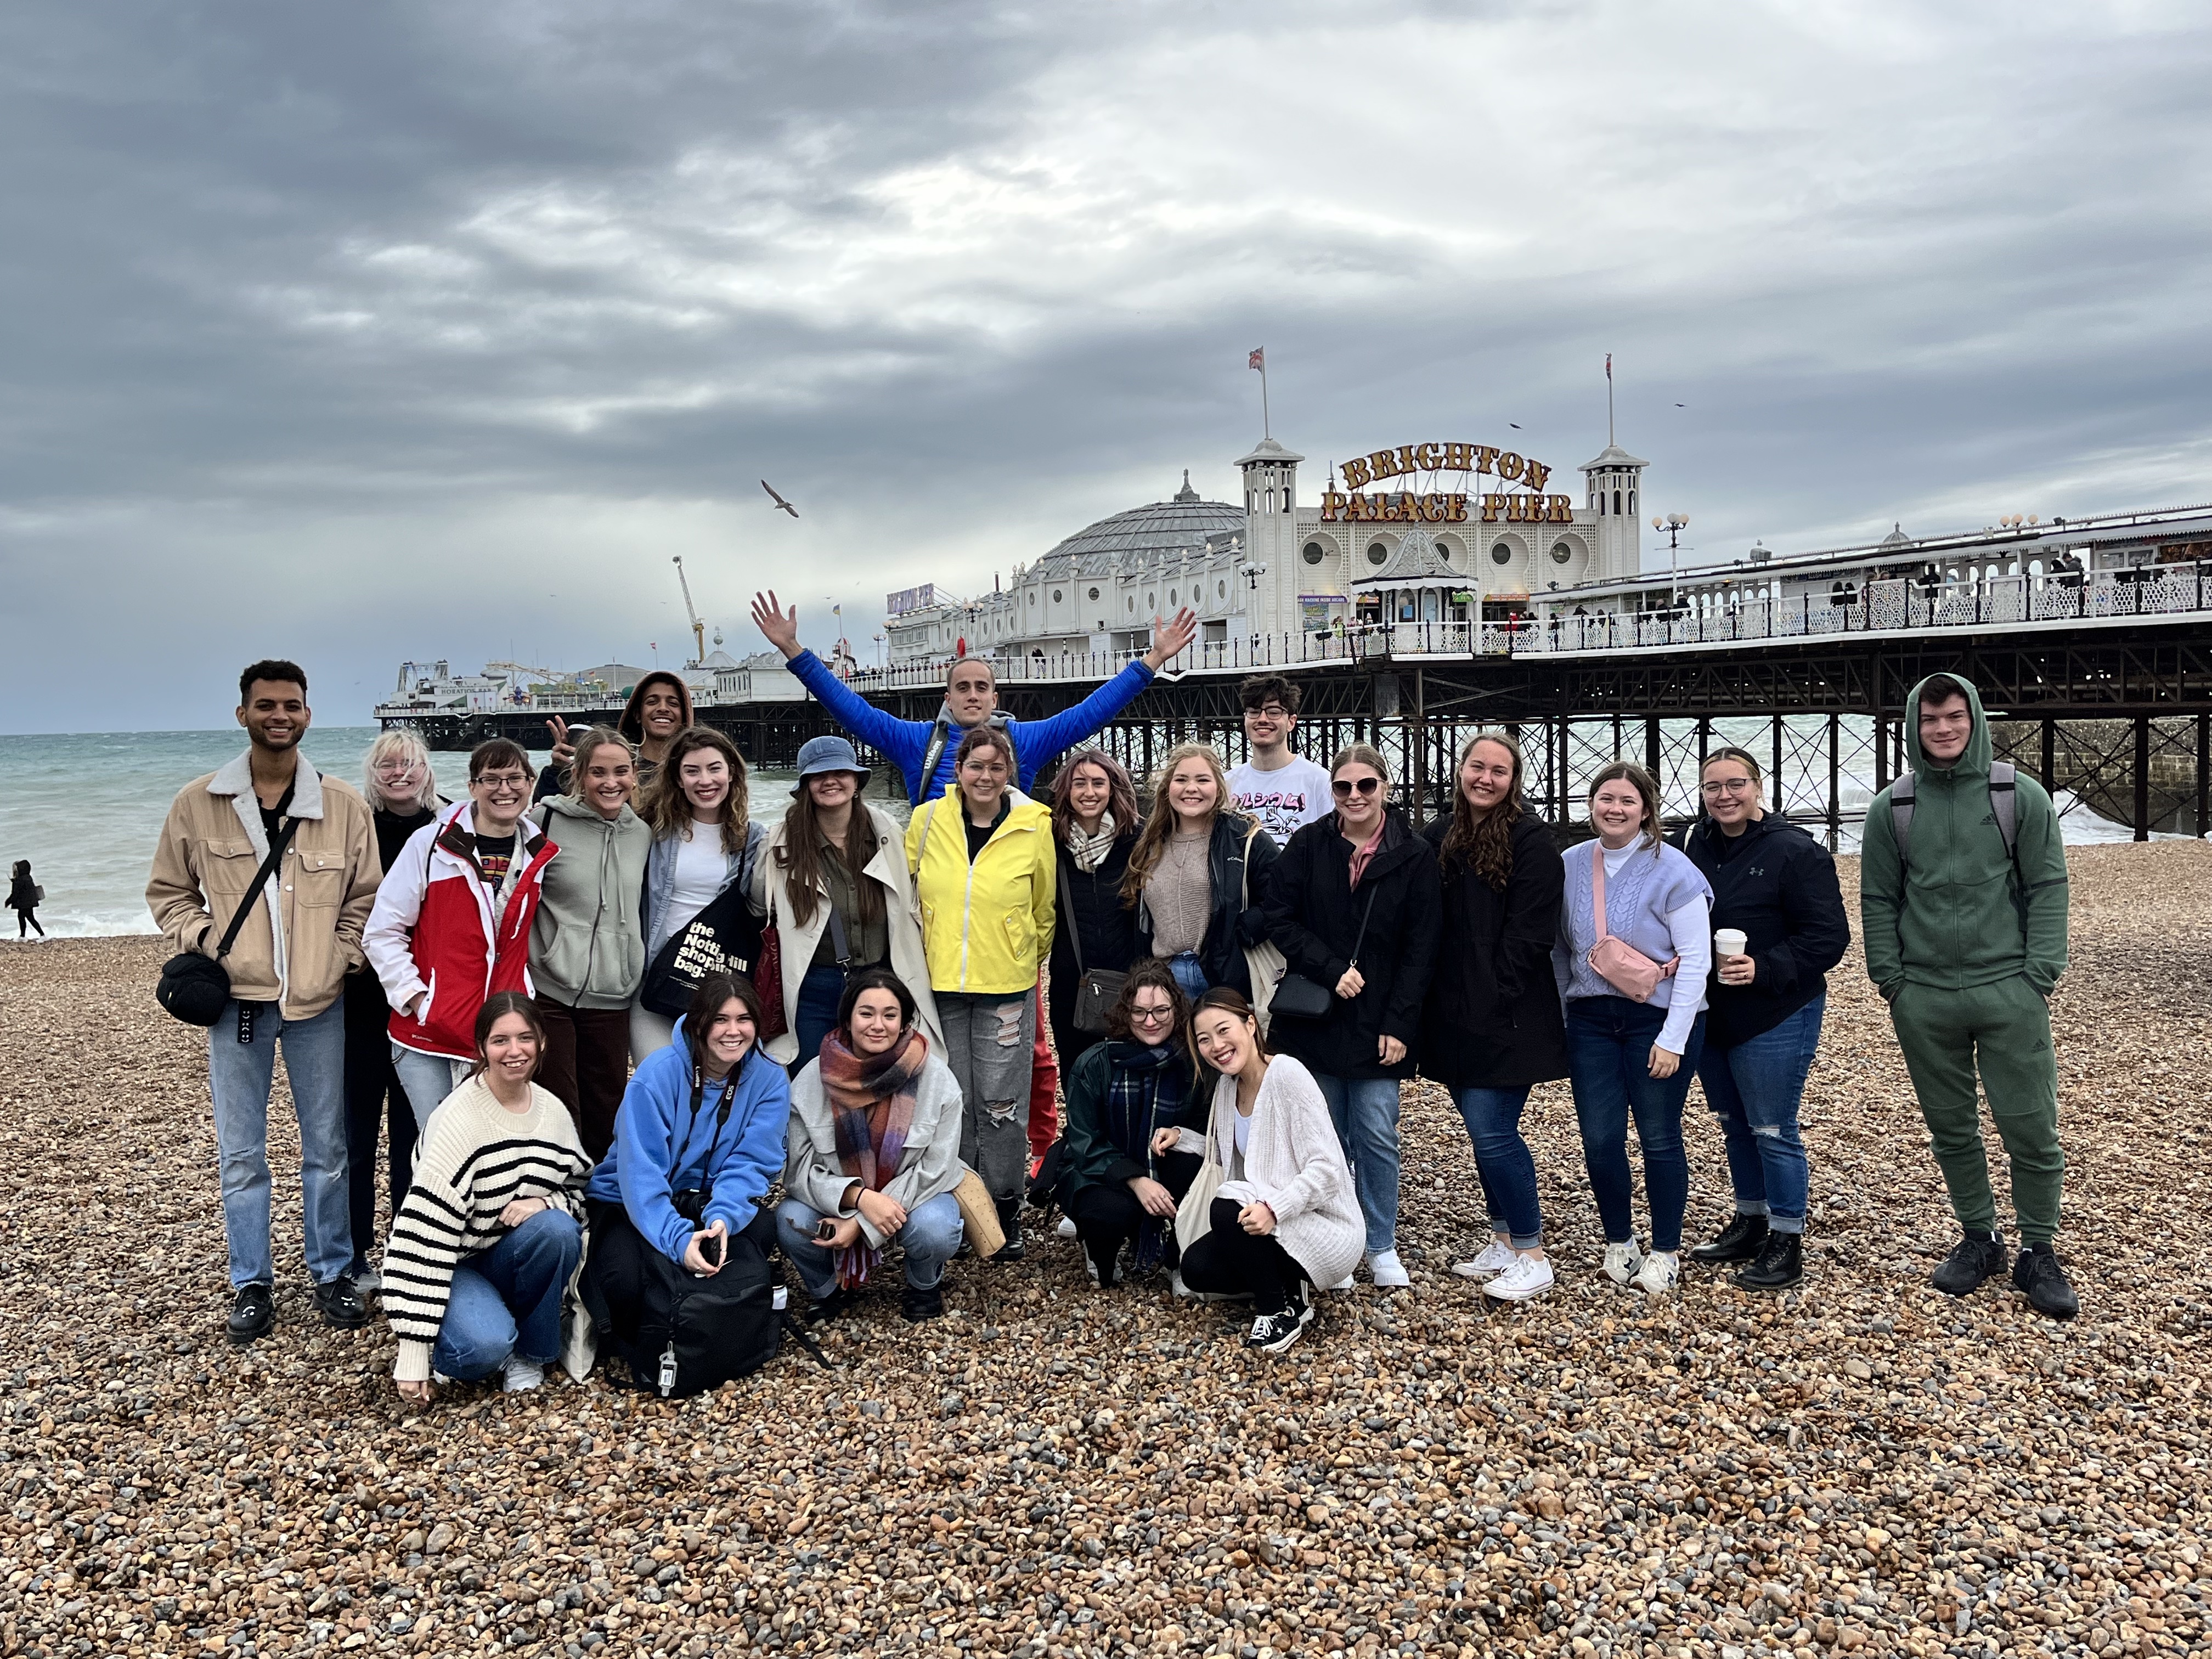 A group of students on the beach with Brighton Palace Pier in the background in Brighton, England